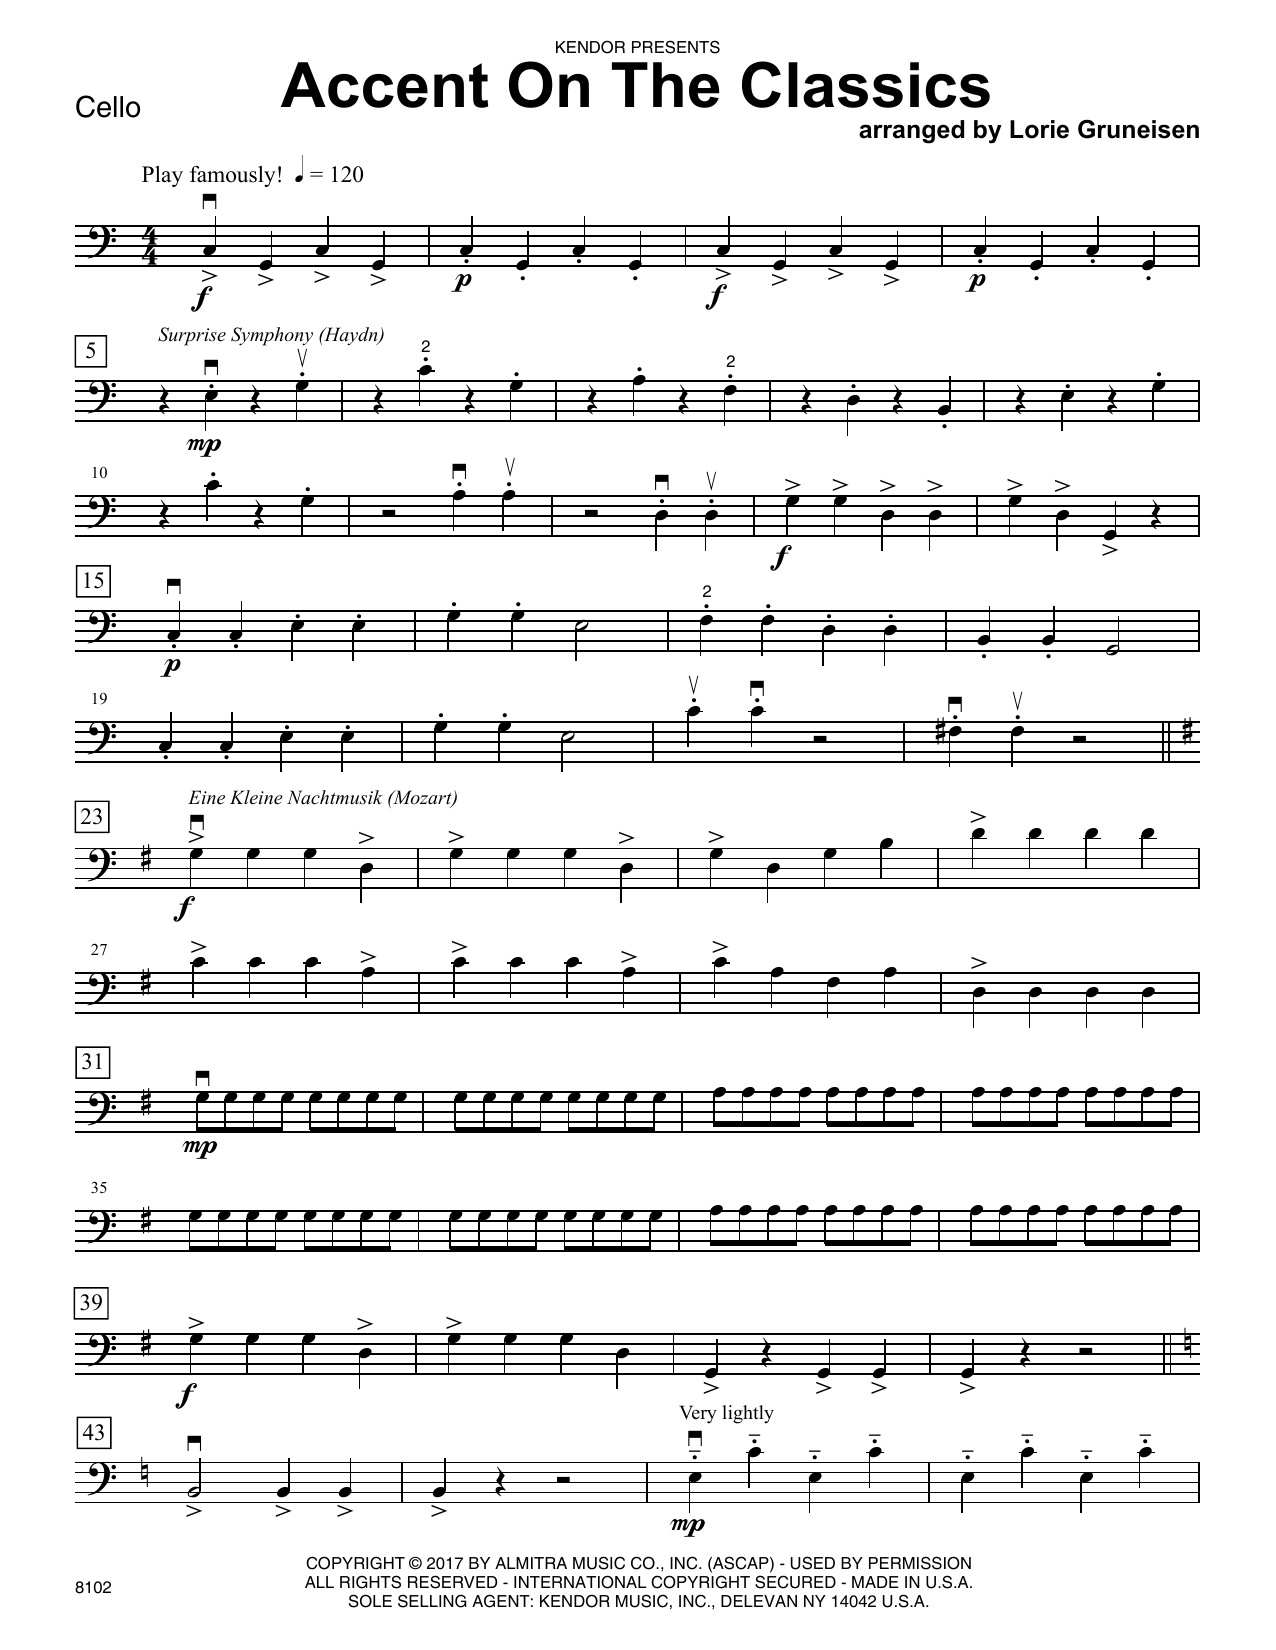 Download Lorie Gruneisen Accent On The Classics - Cello Sheet Music